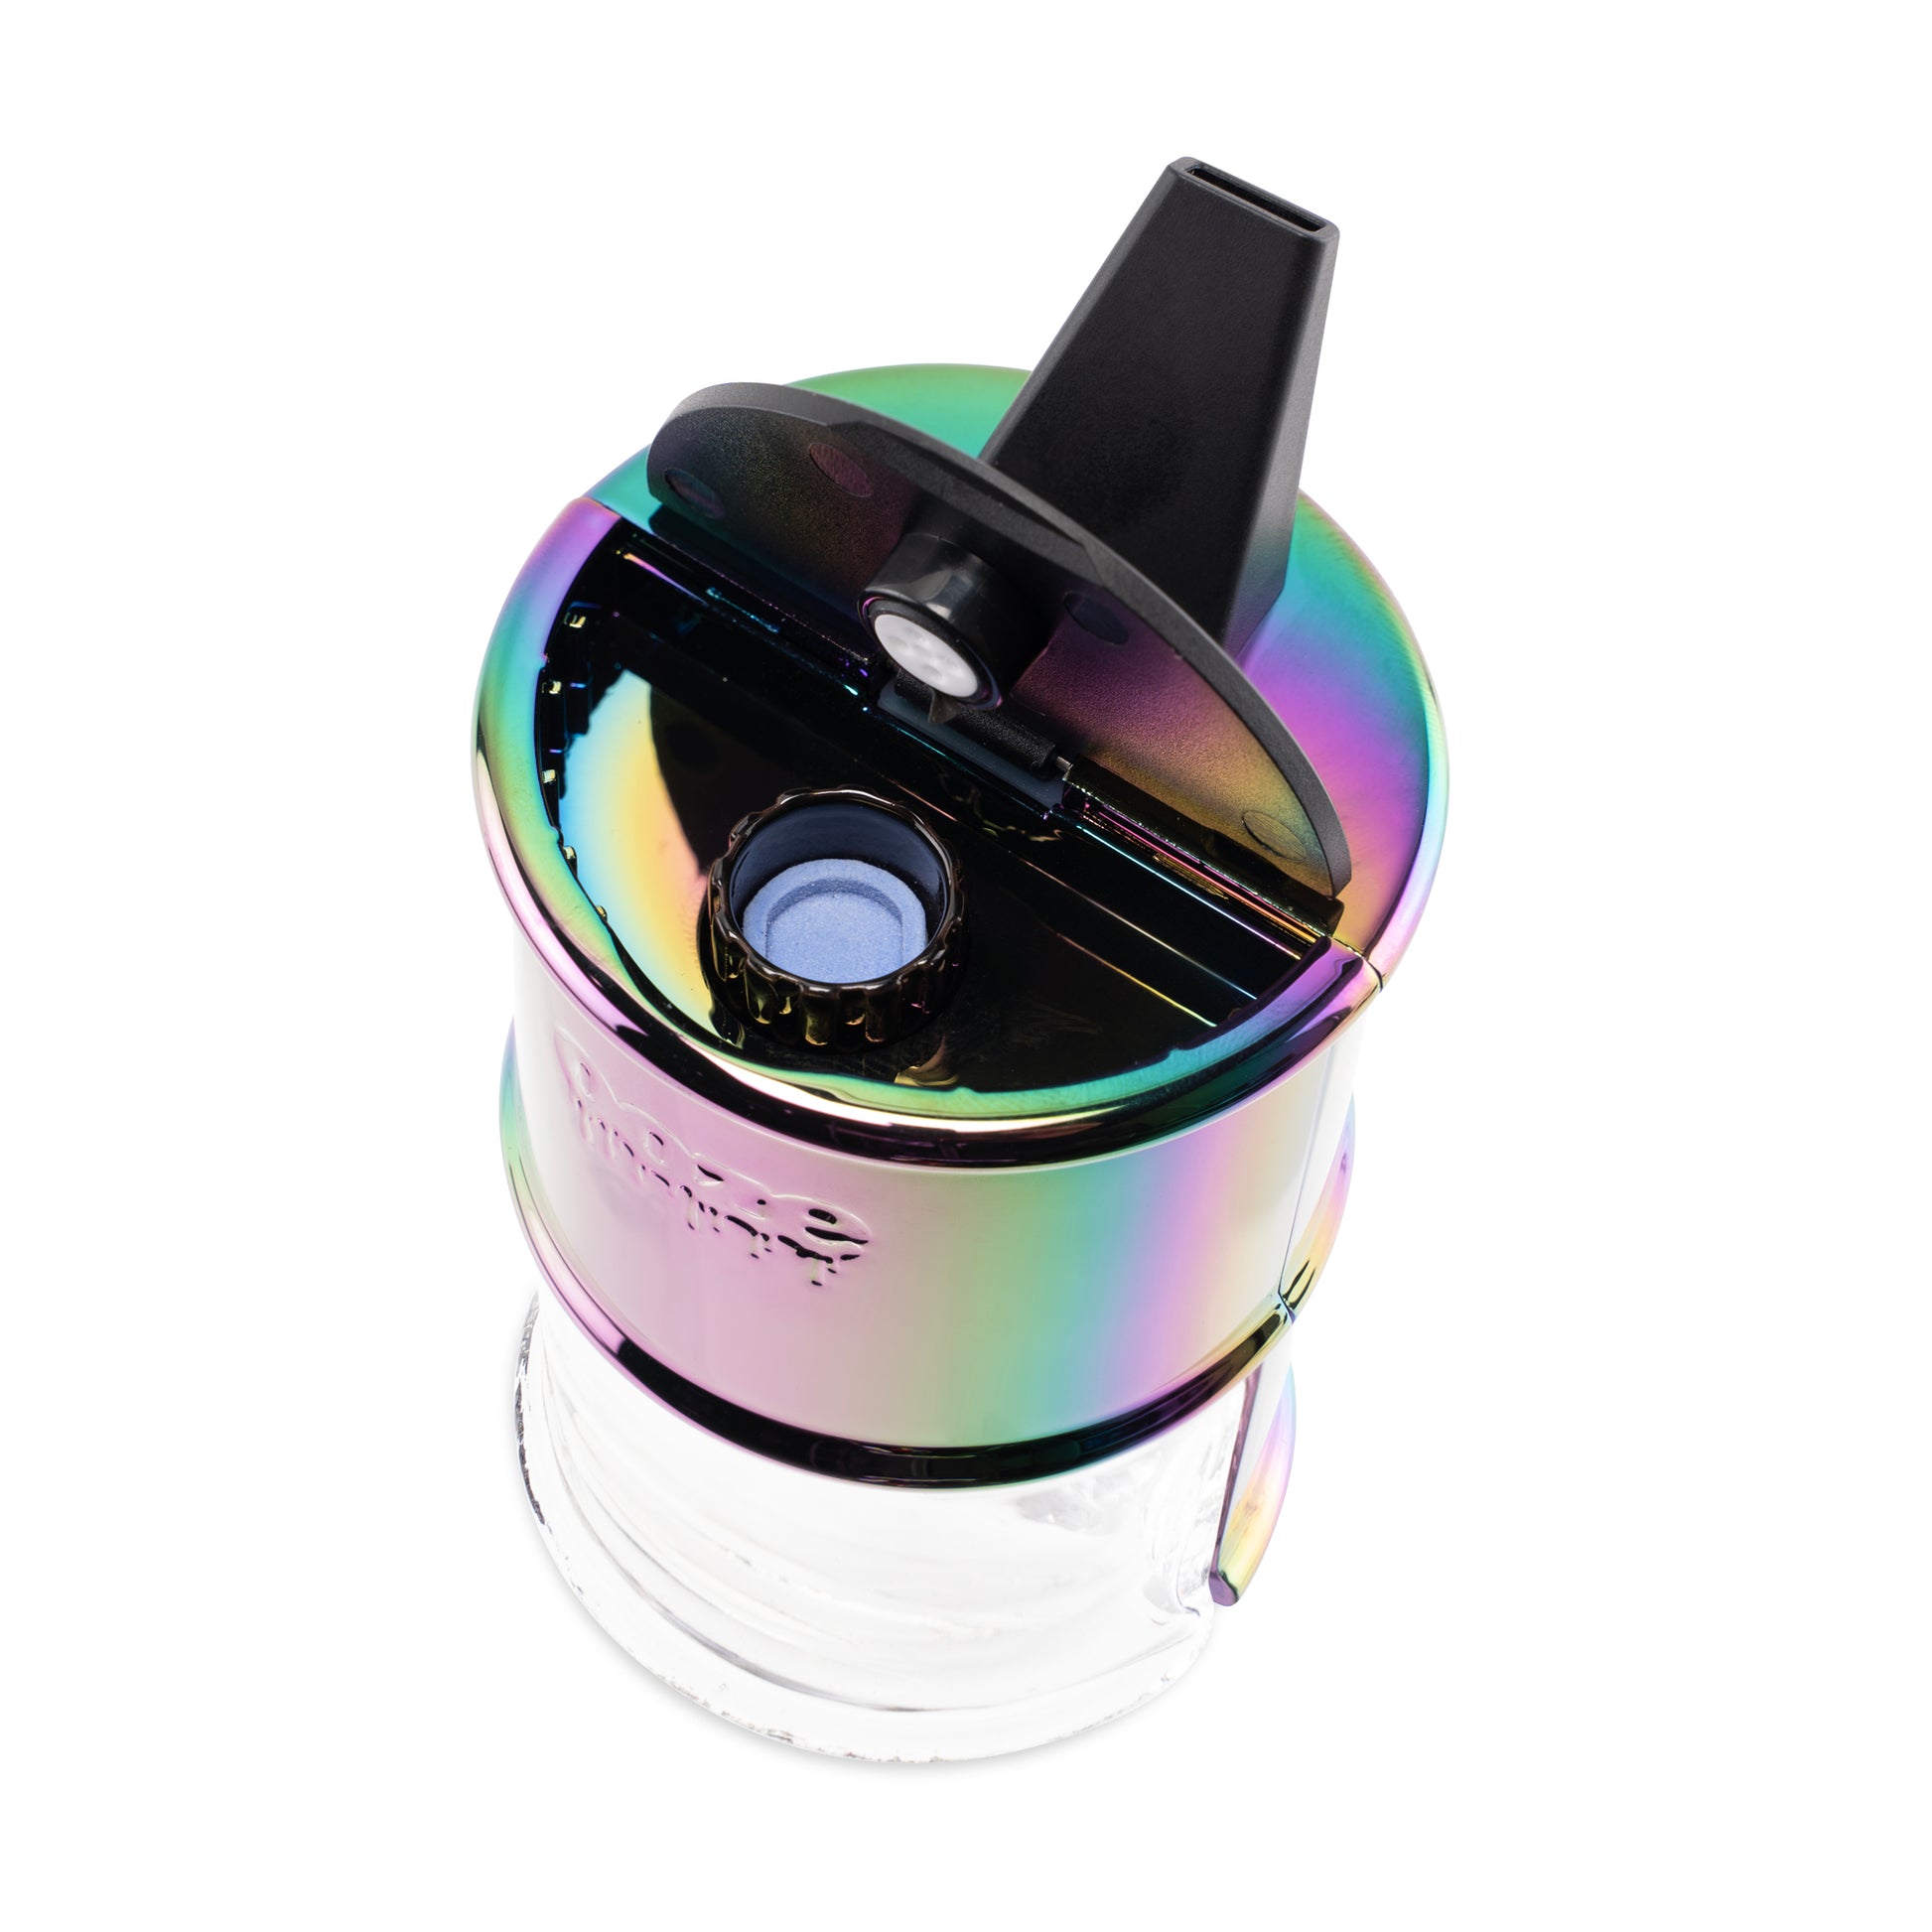 The Rainbow Ooze Electro Barrel E-Rig is shown from above with the lid open to reveal the Onyx Atomizer.